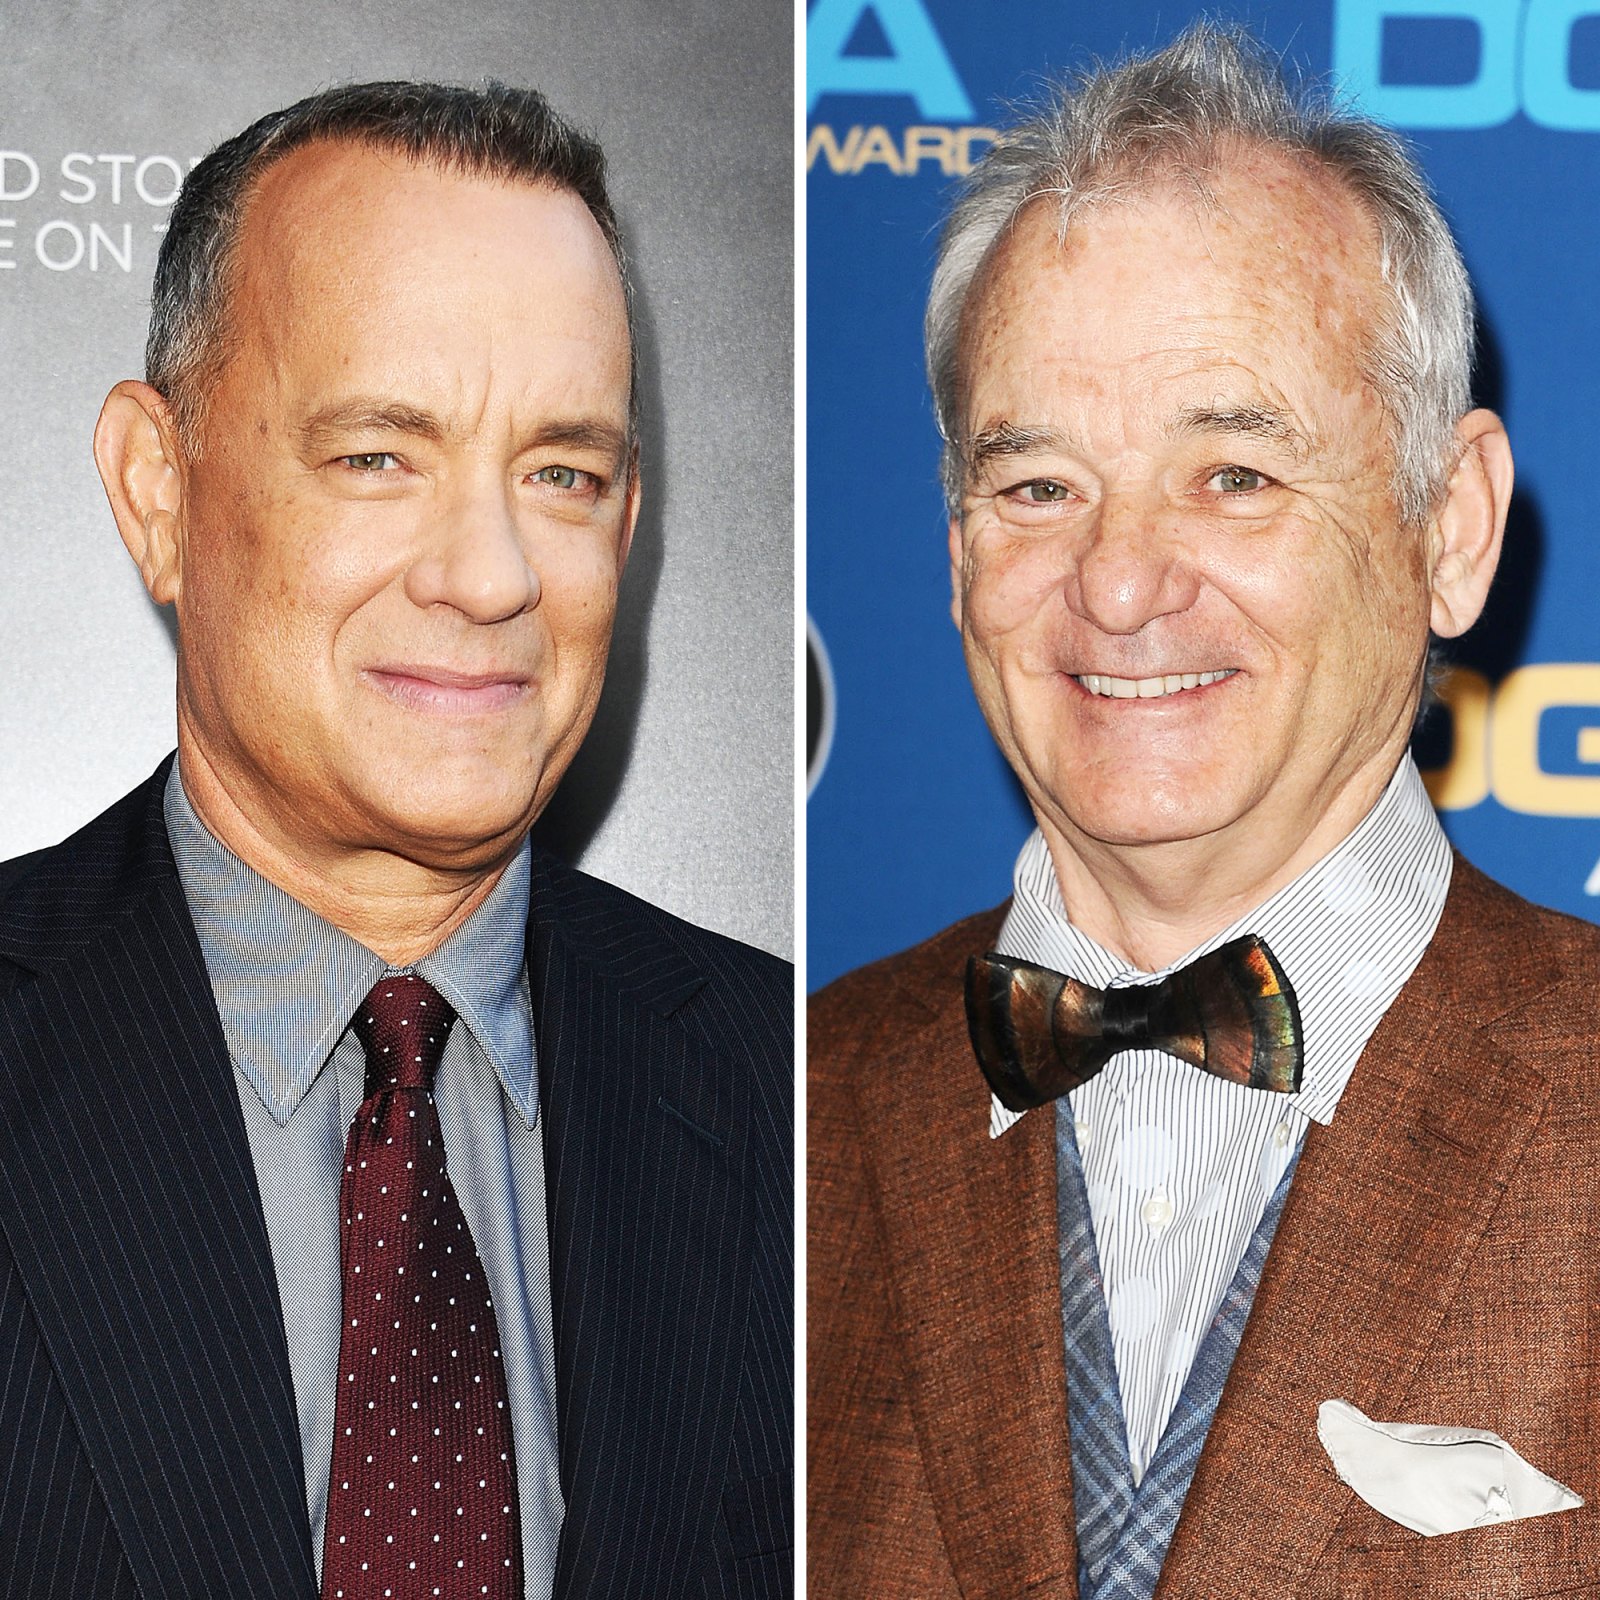 Is This A Photo Of Tom Hanks Or Bill Murray 